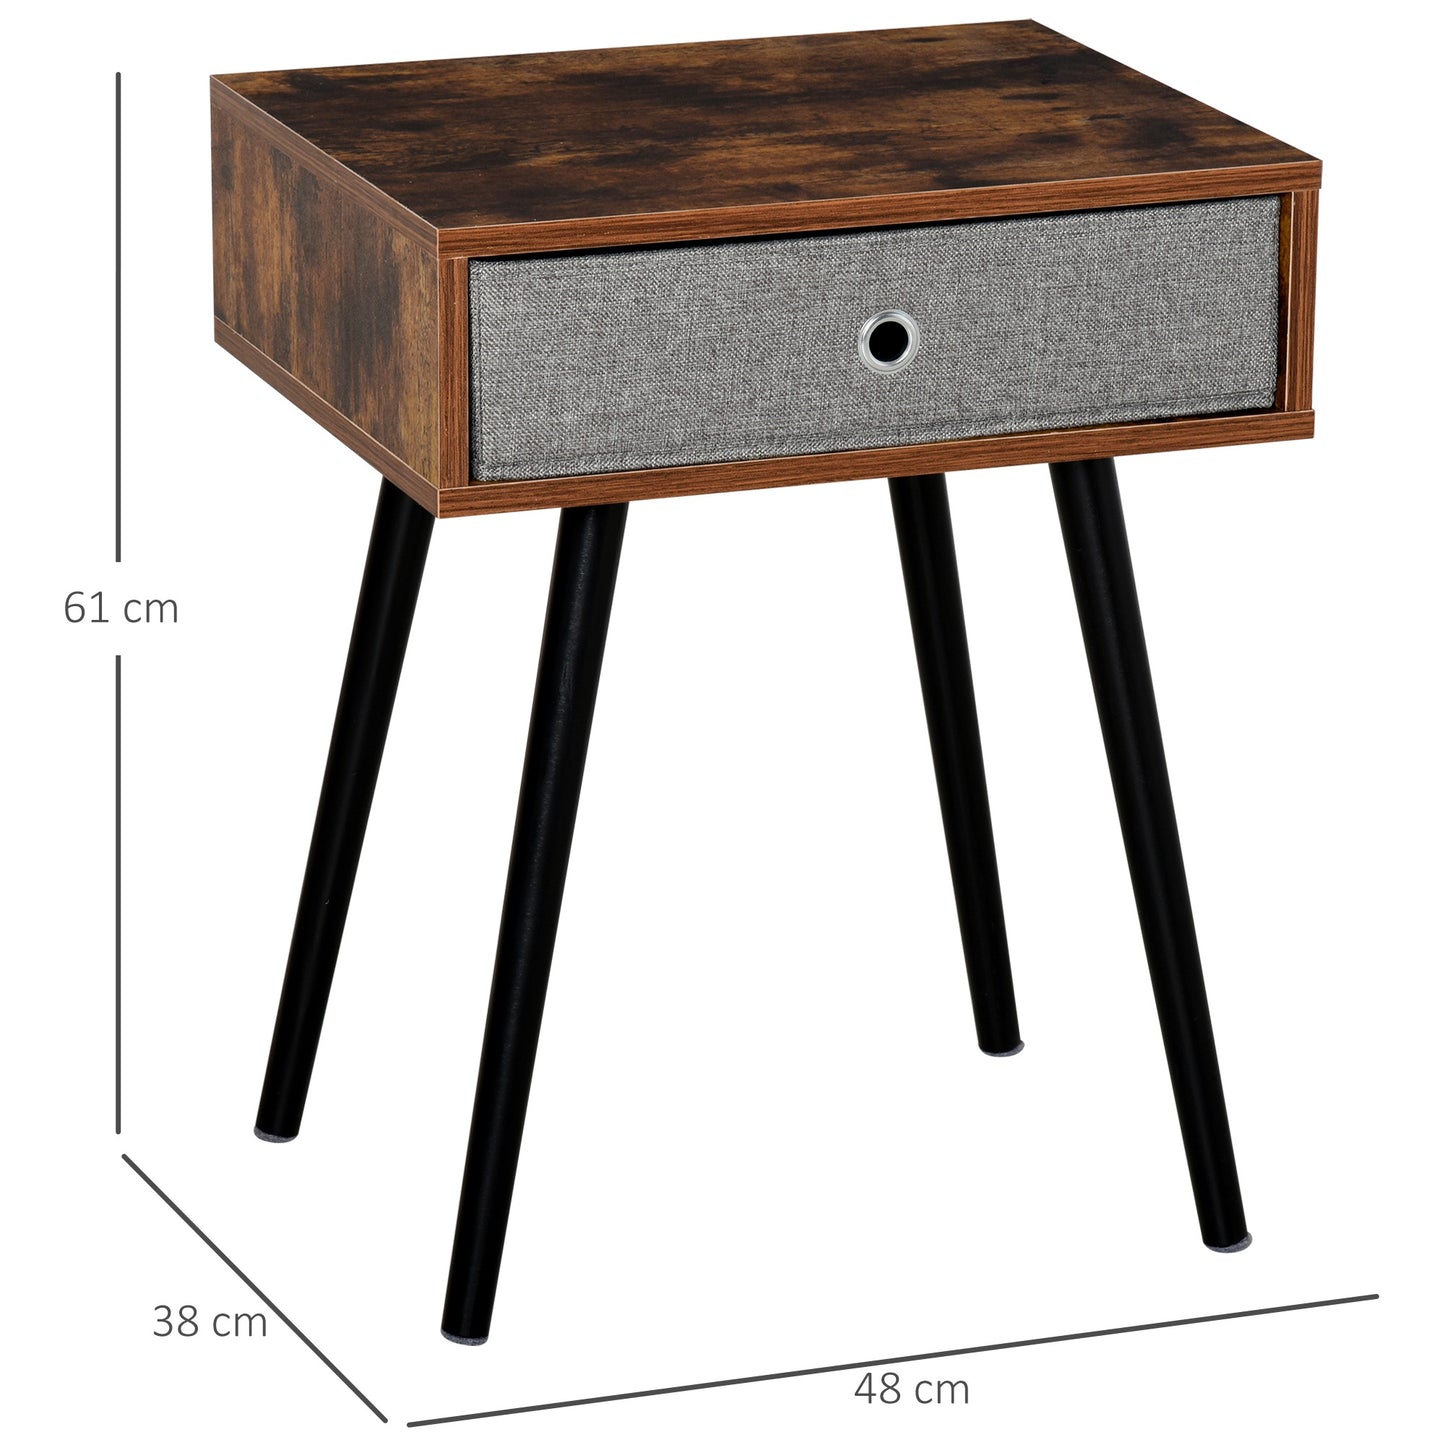 HOMCOM Retro Side Table End Table Nightstand with Removable Fabric Drawer Living Room